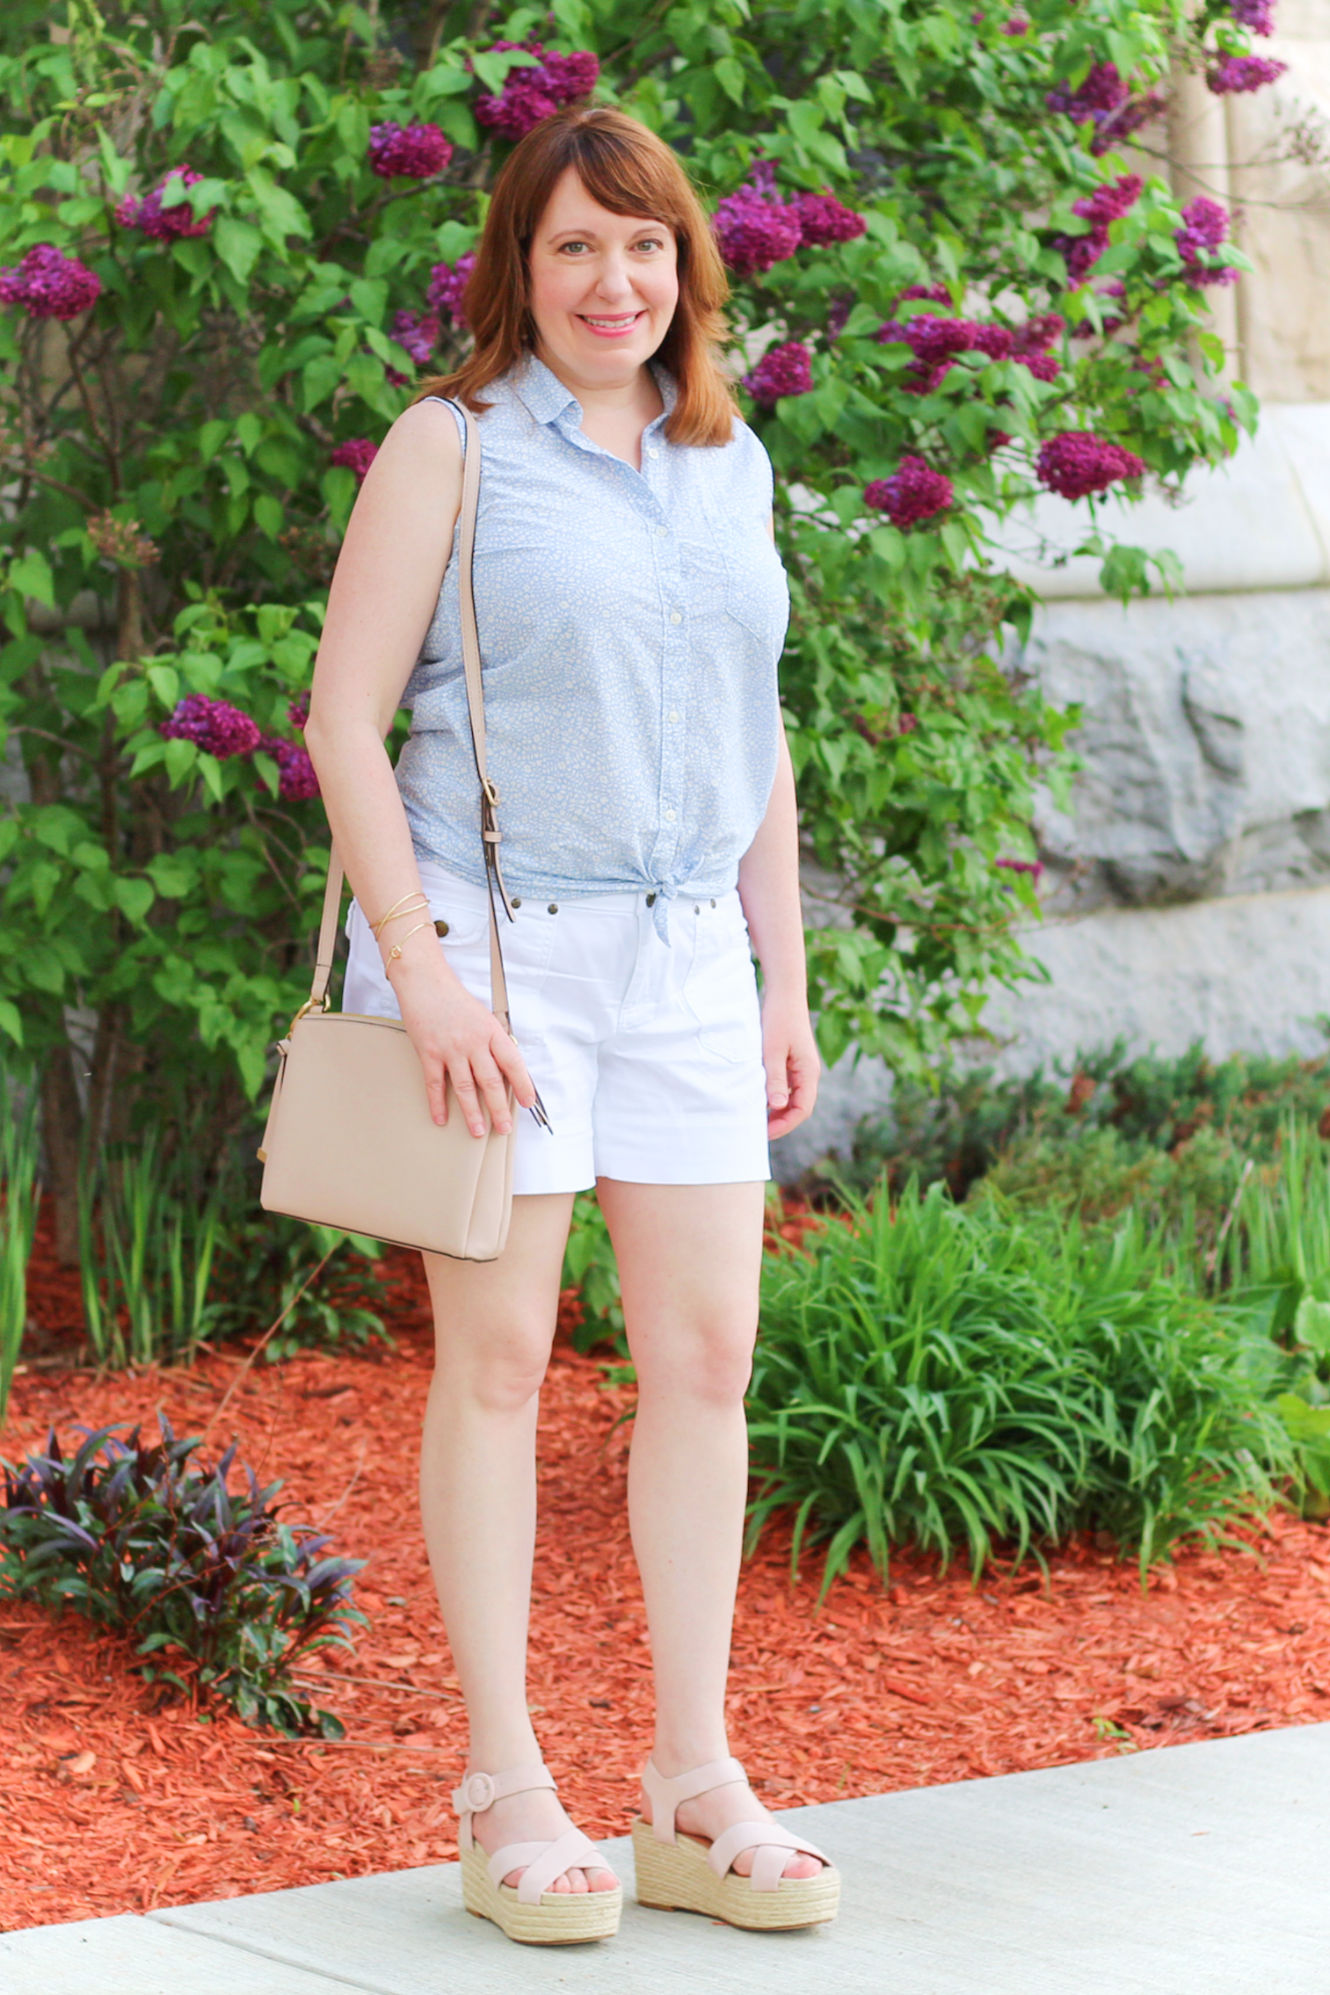 Spring/Summer Outfits #fashion #style #fashionblogger #fashionblog #overfortyfashionblogger